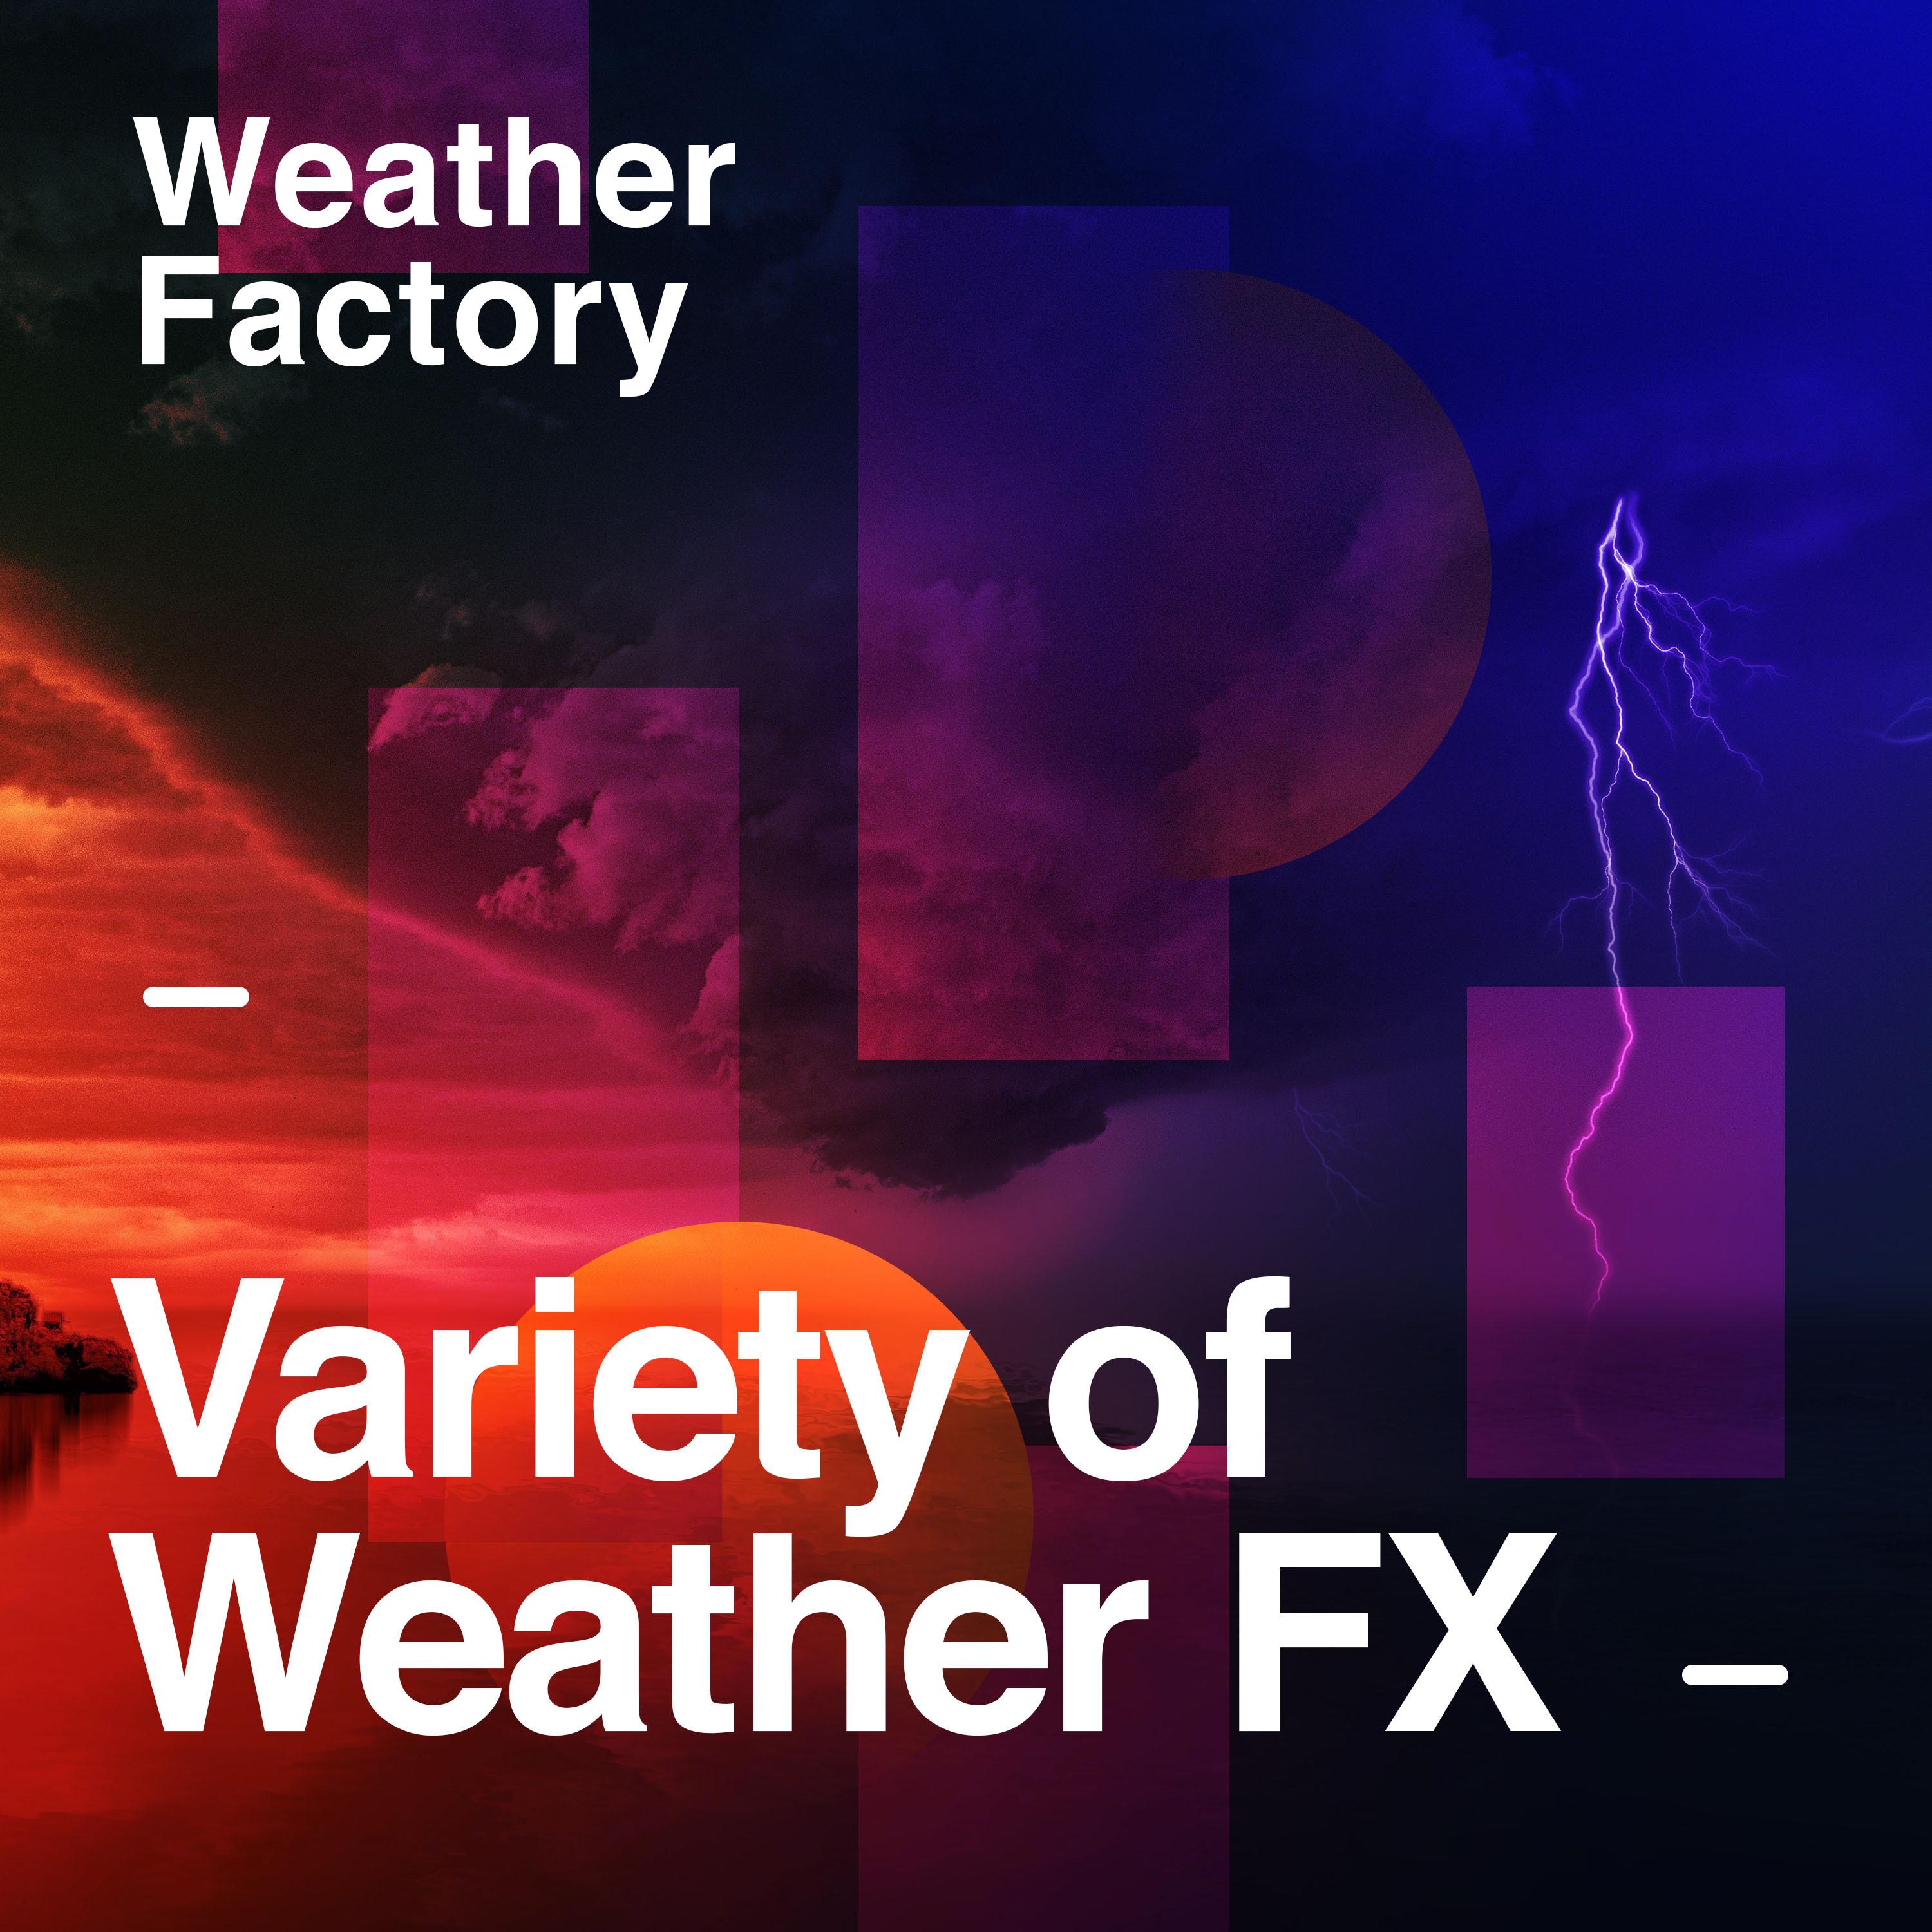 Variety of Weather FX